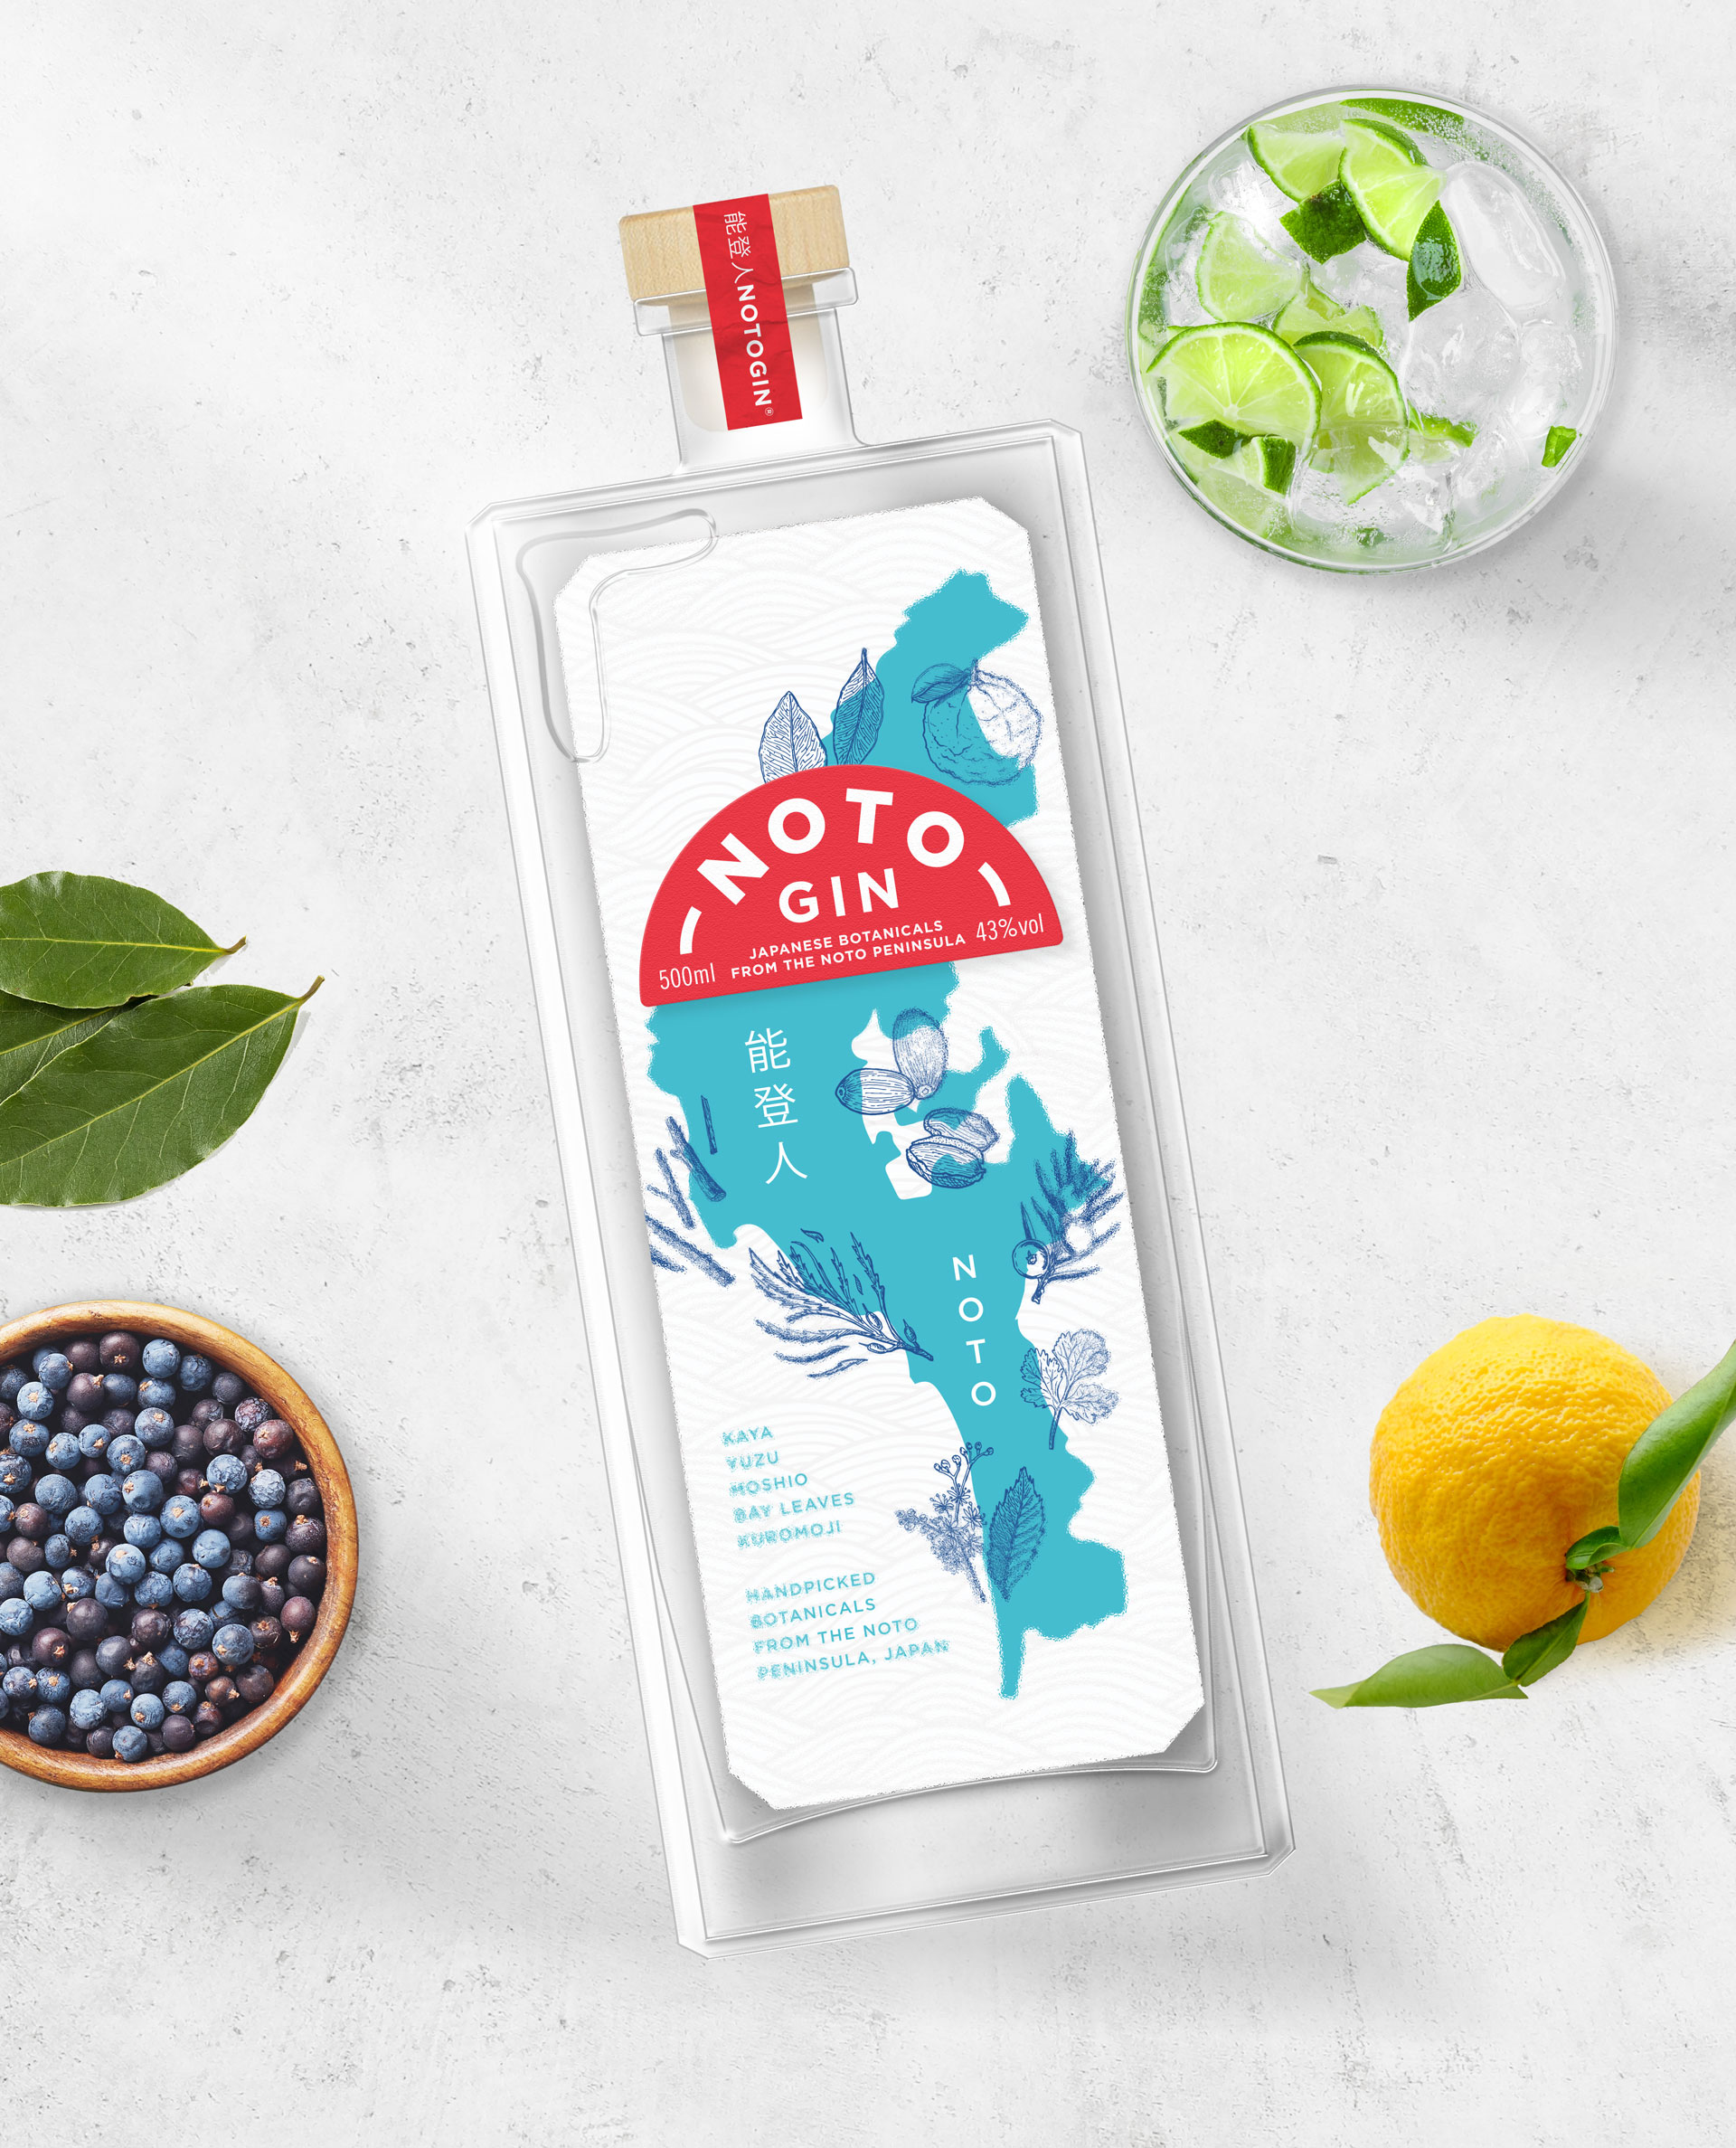 Noto Gin Brand Identity and Packaging Design Created by Episode Two